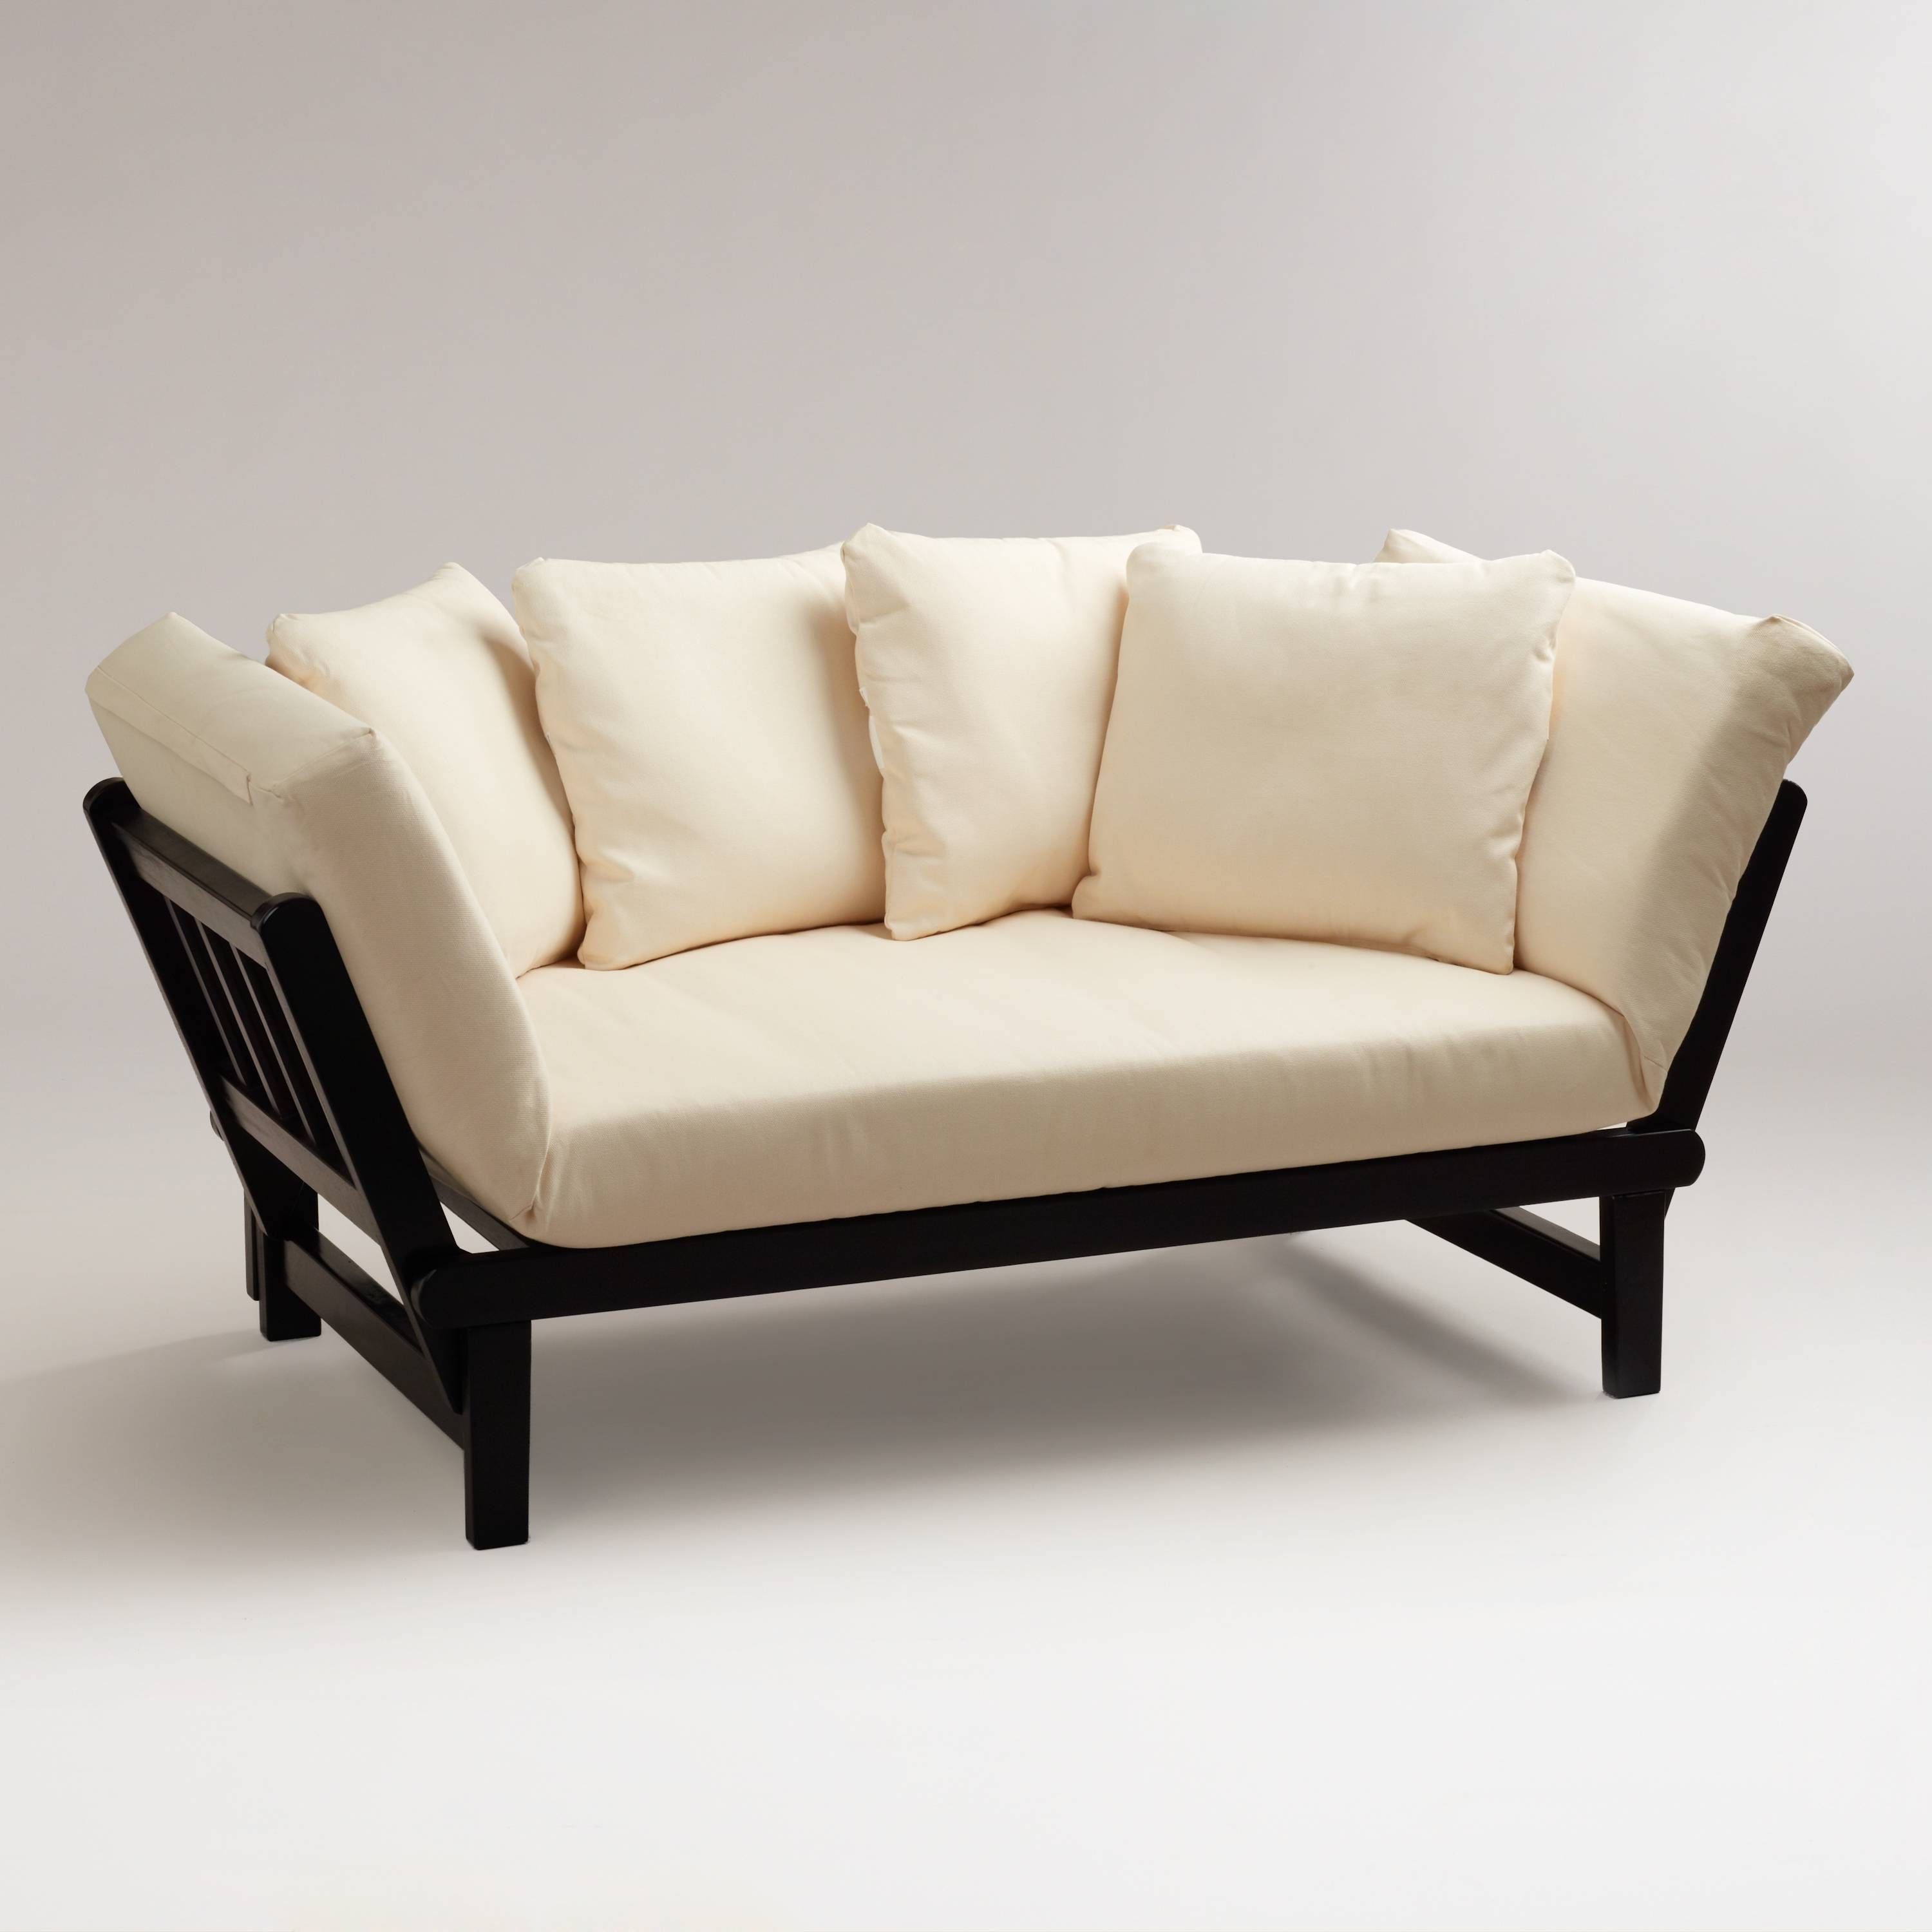 White Sofa Chair Bed | Tehranmix Decoration With Regard To White Sofa Chairs (View 27 of 30)